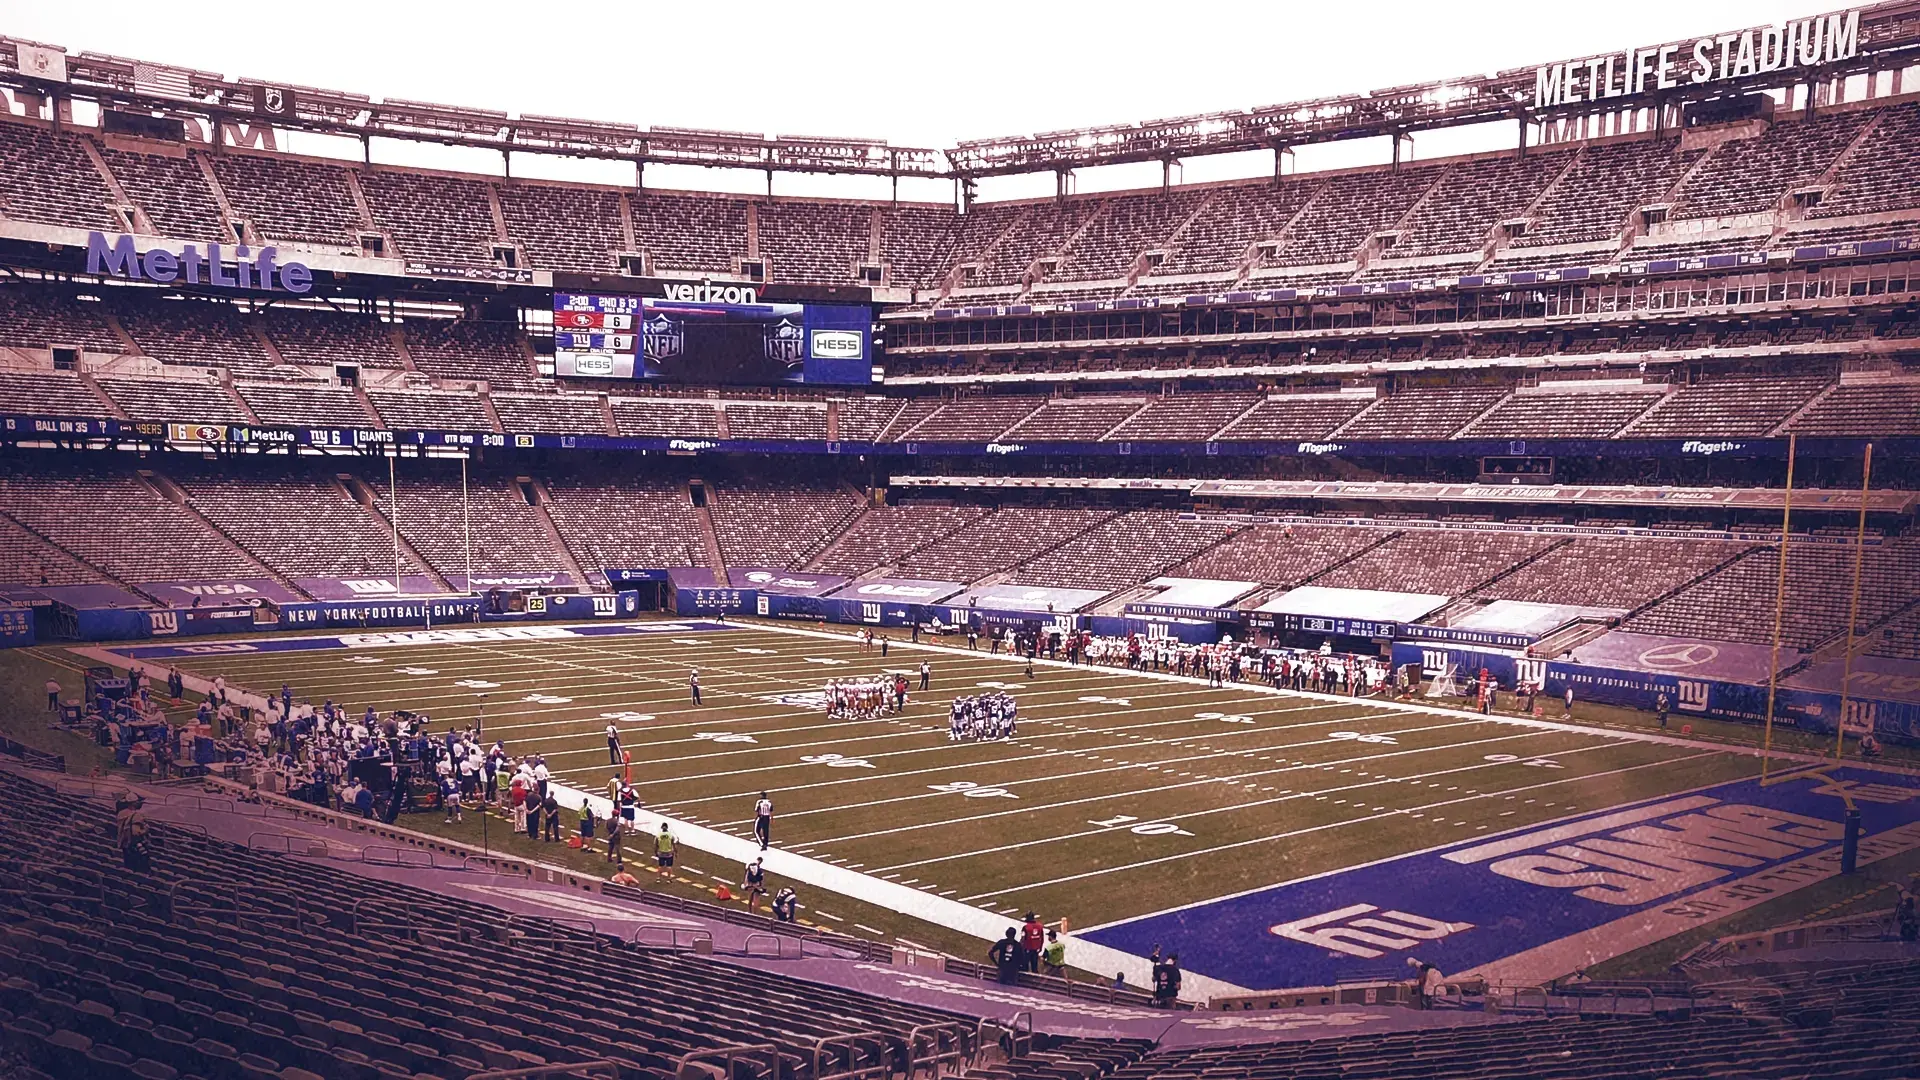 MetLife Stadium, home of the Giants. / Treated Image by SNY